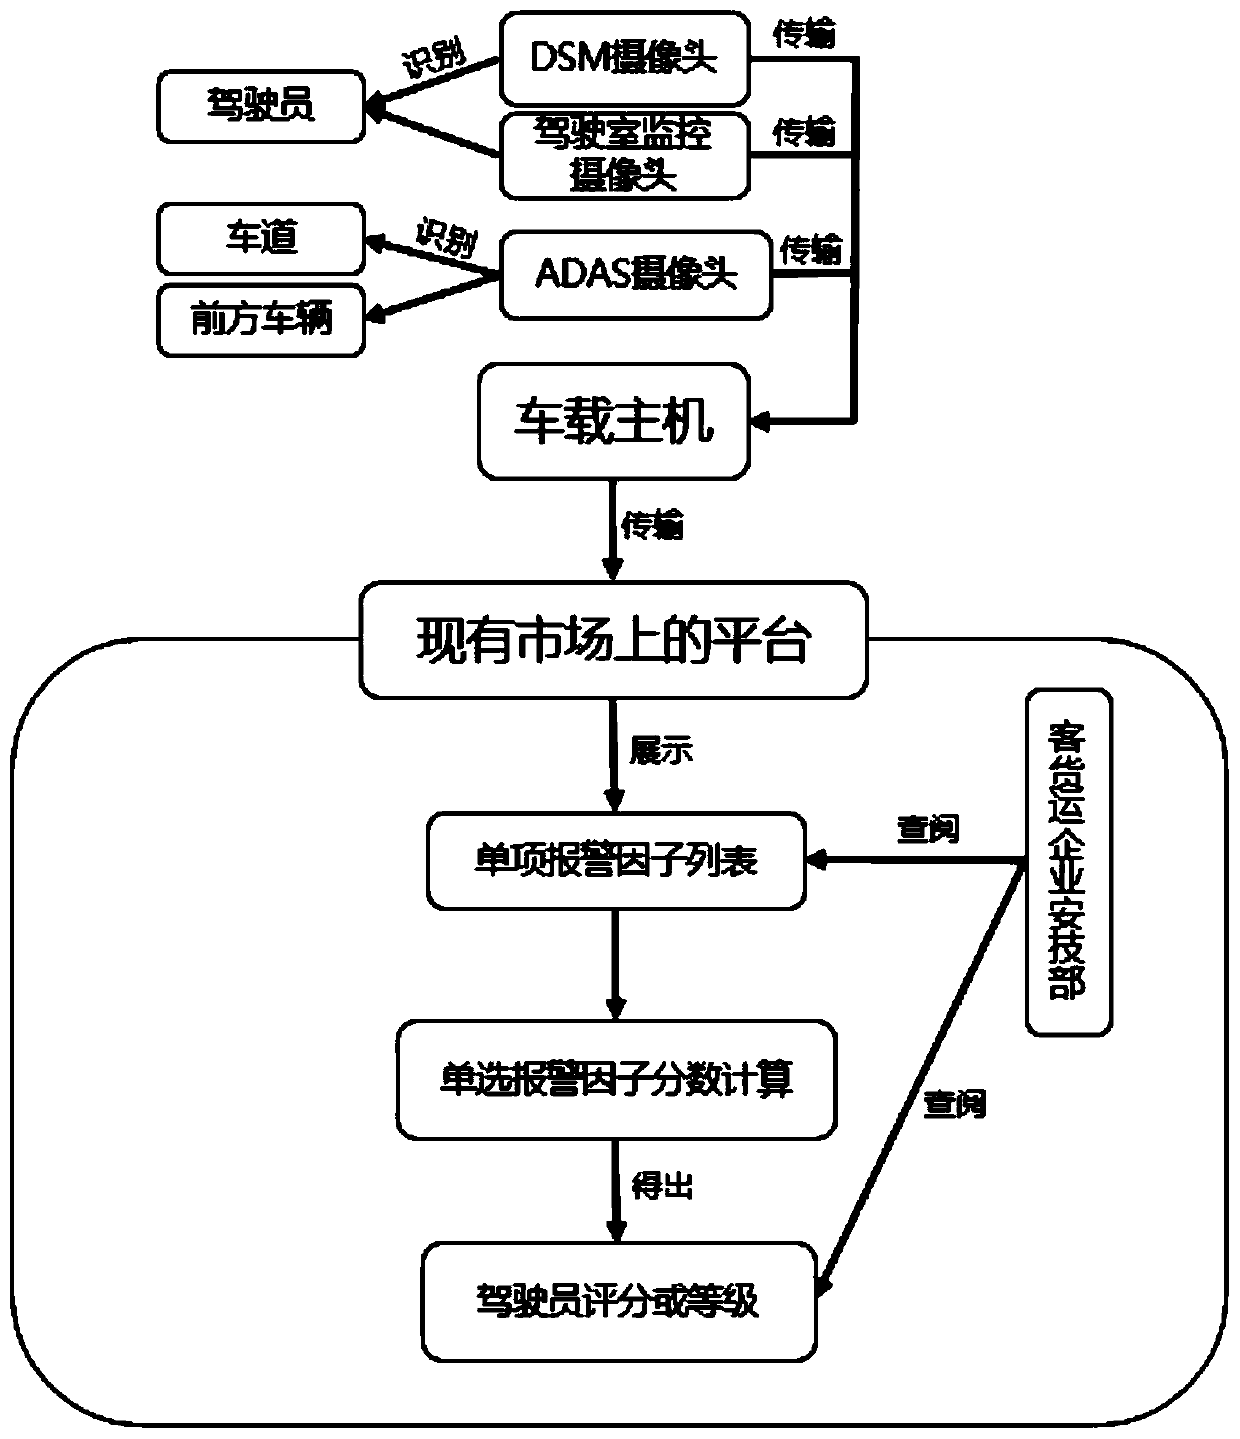 Driver risk evaluation system and method